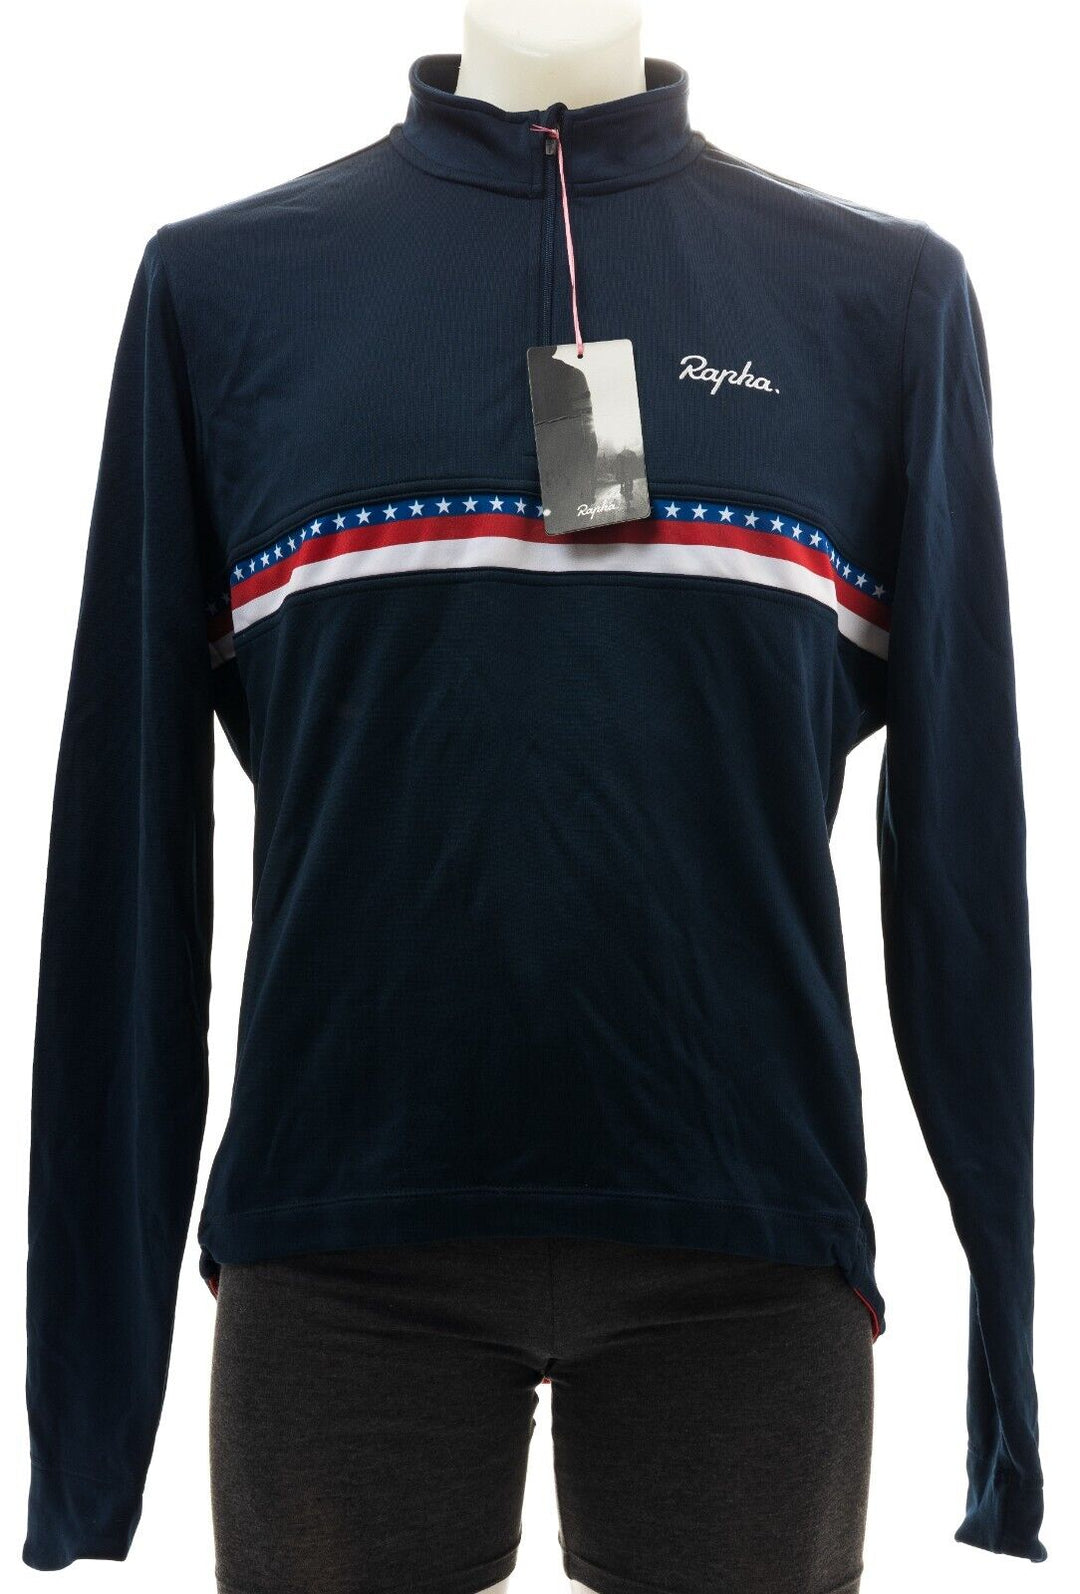 Rapha Long Sleeve Country Jersey USA Men XX-LARGE Navy Road Cycling Gravel Wool